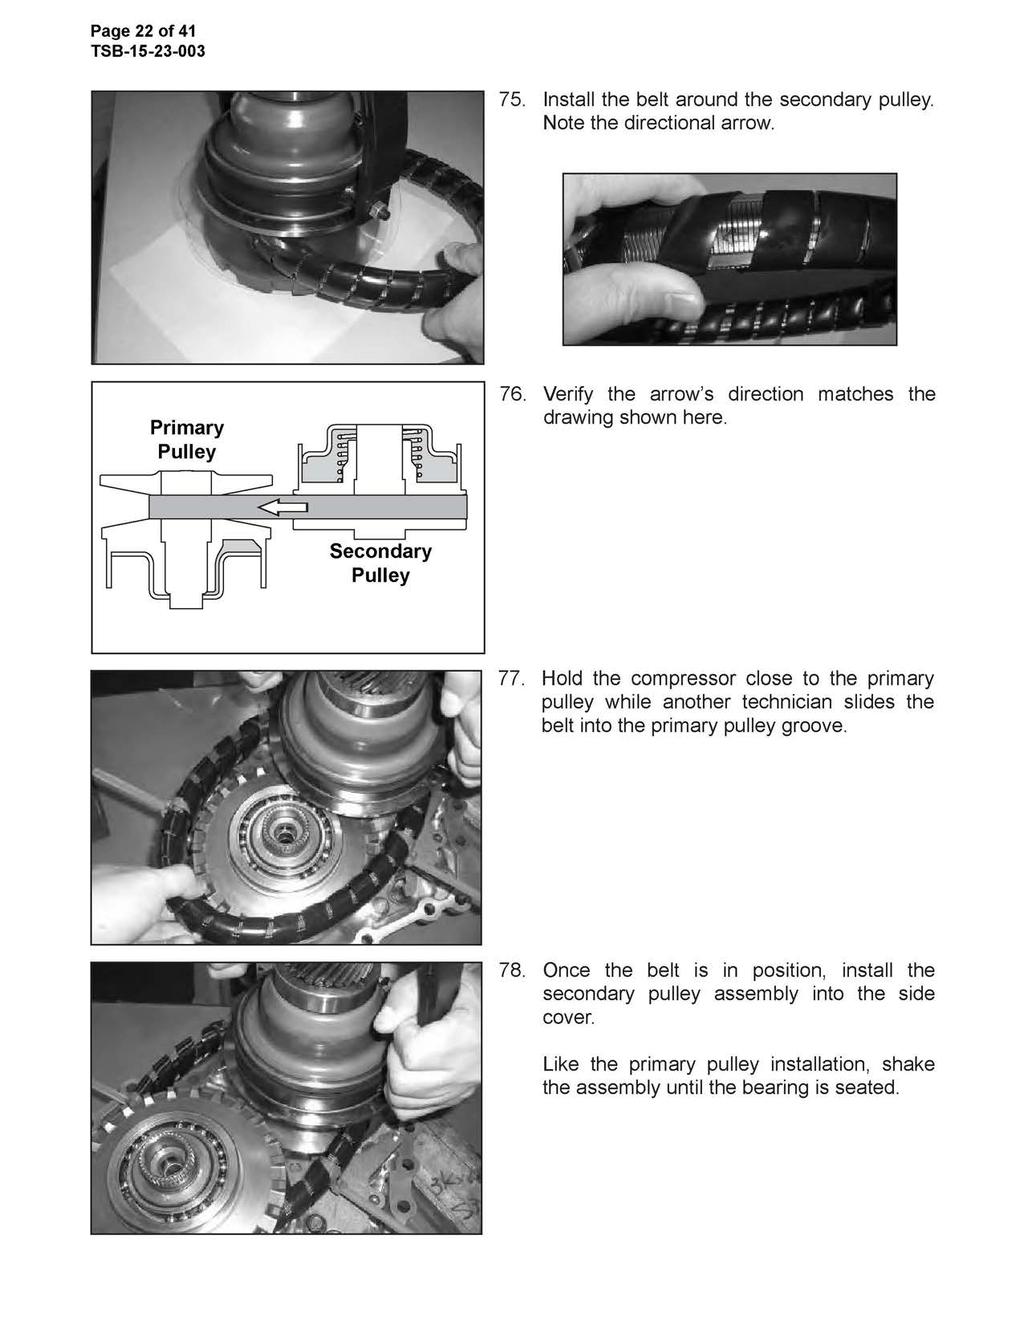 Page 22 of 41 75. Install the belt around the secondary pulley. Note the directional arrow. Primary Pulley 76. Verify the arrow's direction matches the drawing shown here. Secondary Pulley 77.